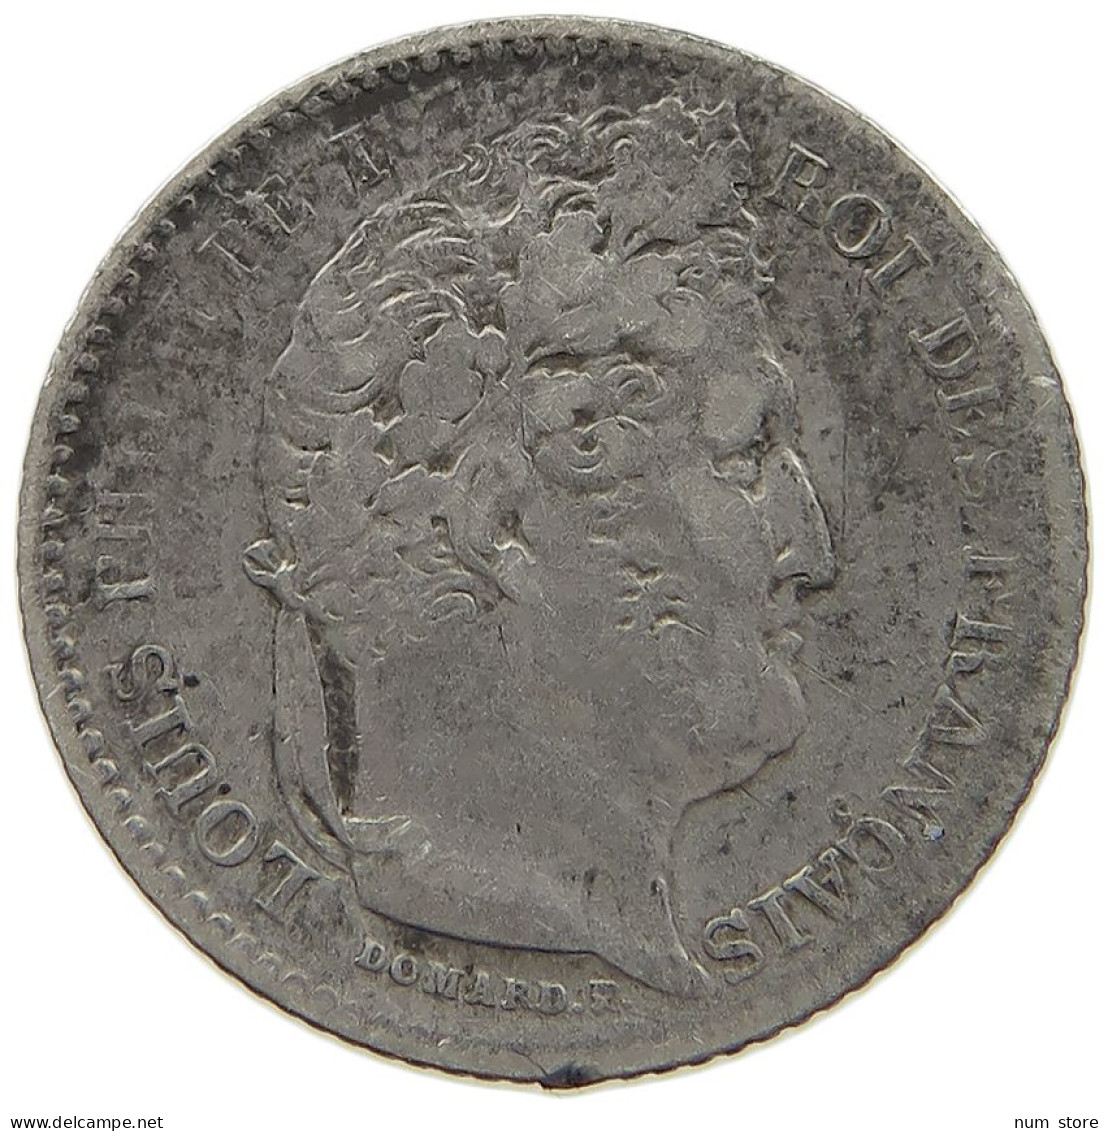 FRANCE 25 CENTIMES 1845 B LOUIS PHILIPPE I. #MA 021569 - 25 Centimes